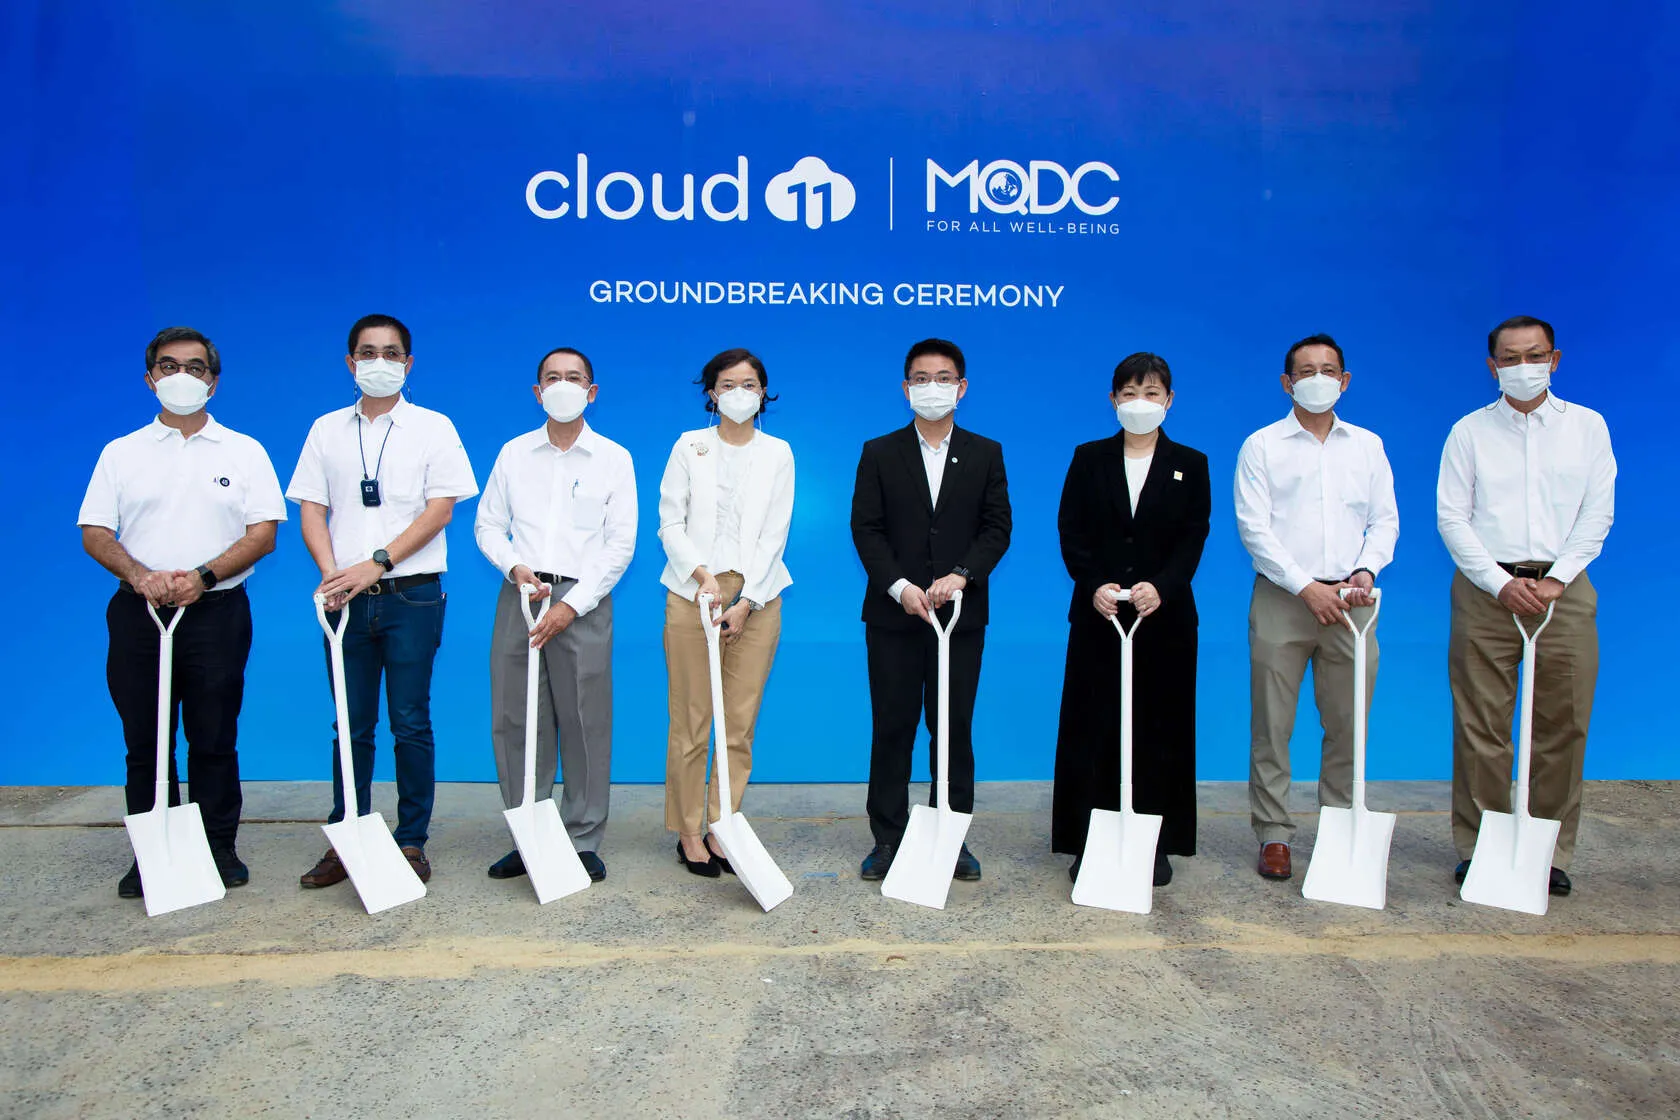 MQDC Holds Groundbreaking Ceremony for “Cloud 11”